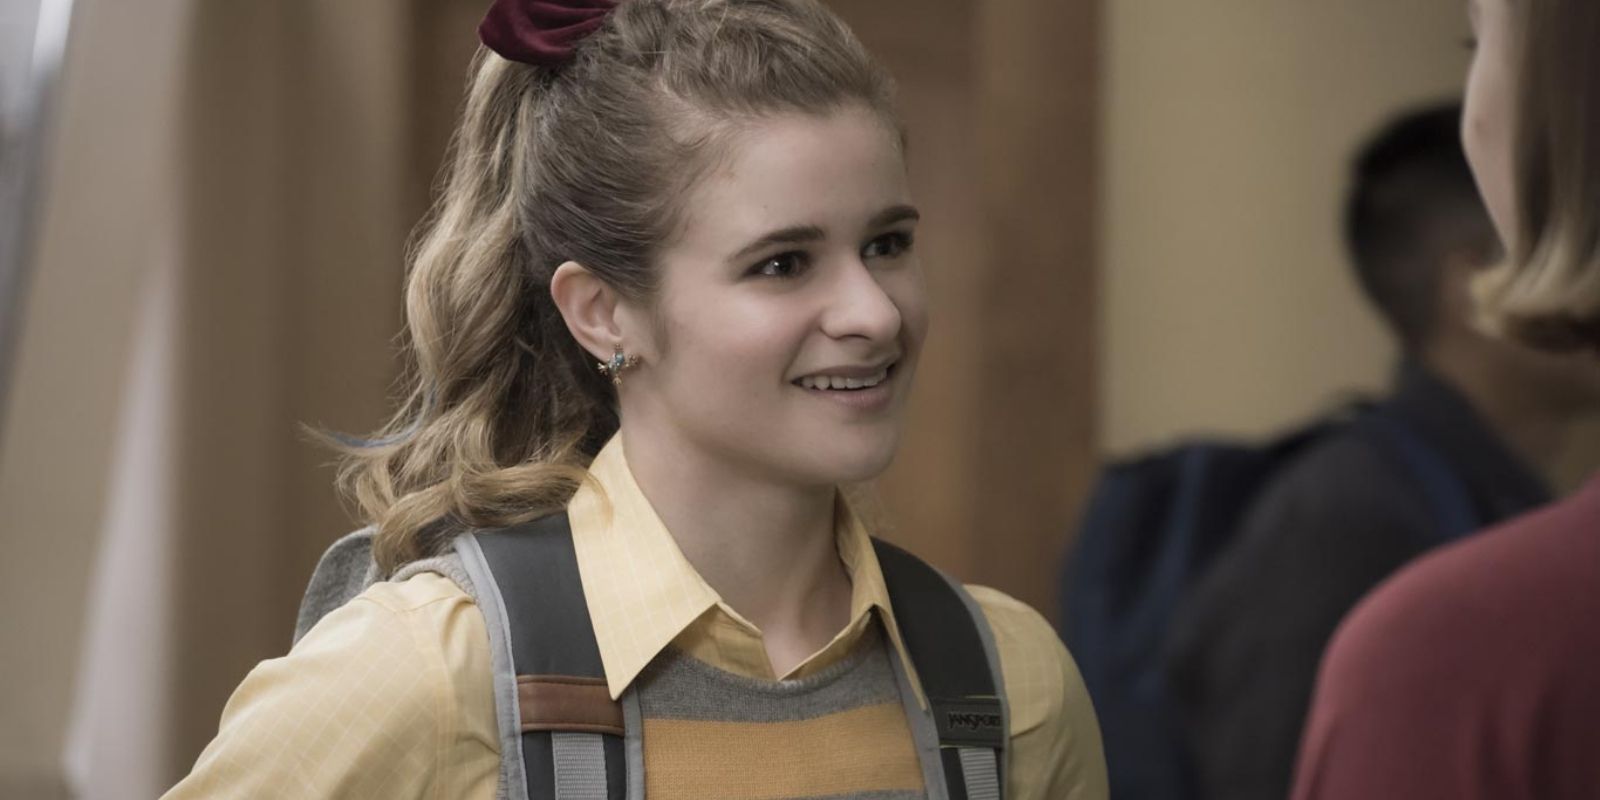 Paige Hardaway smiles at Sam in their high school hallway in Atypical